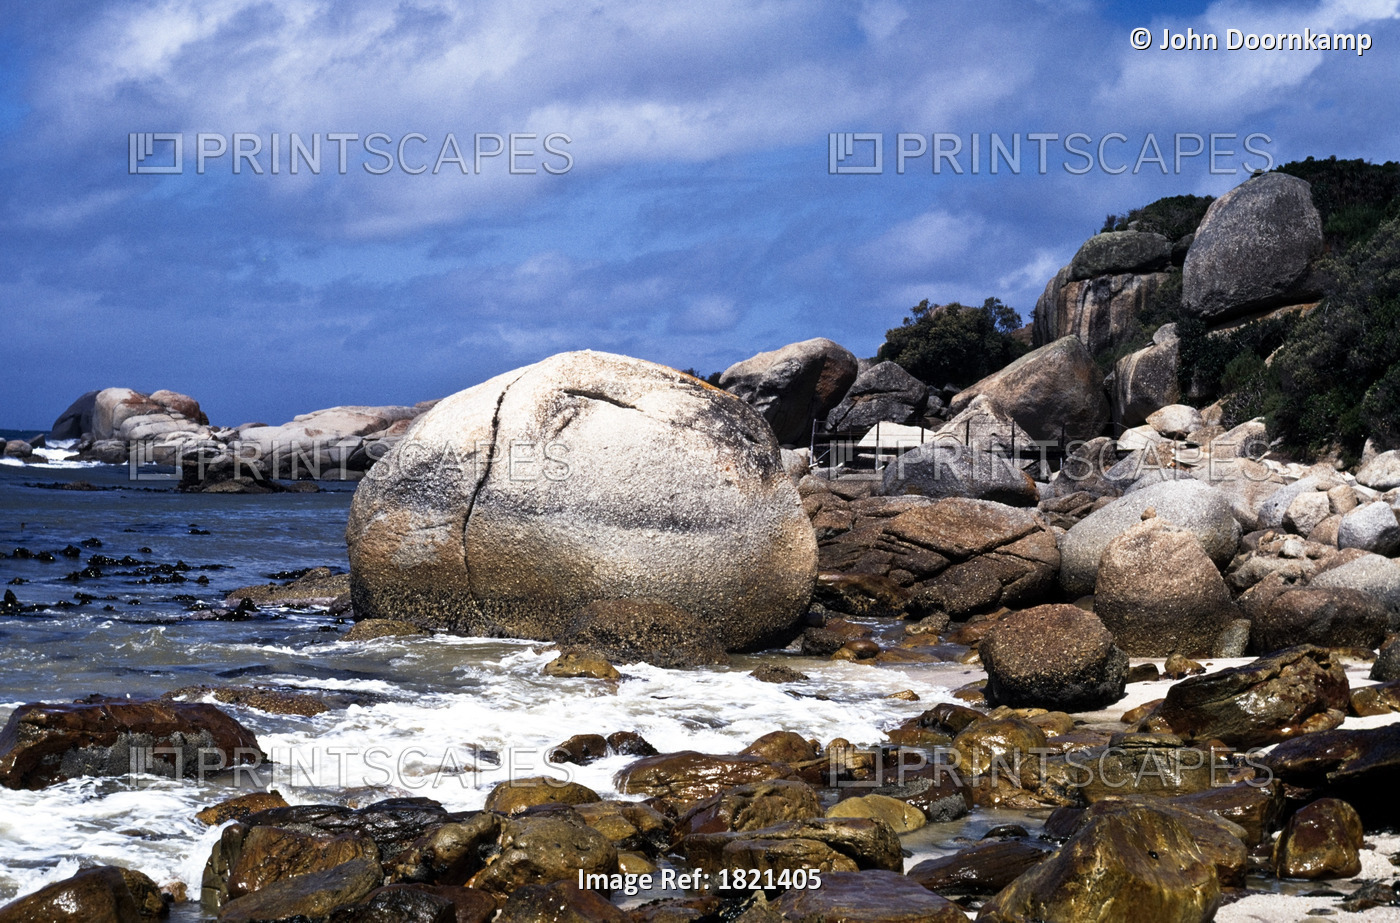 BOULDERS ON BEACH, CAPE OF GOOD HOPE, SOUTH AFRICA